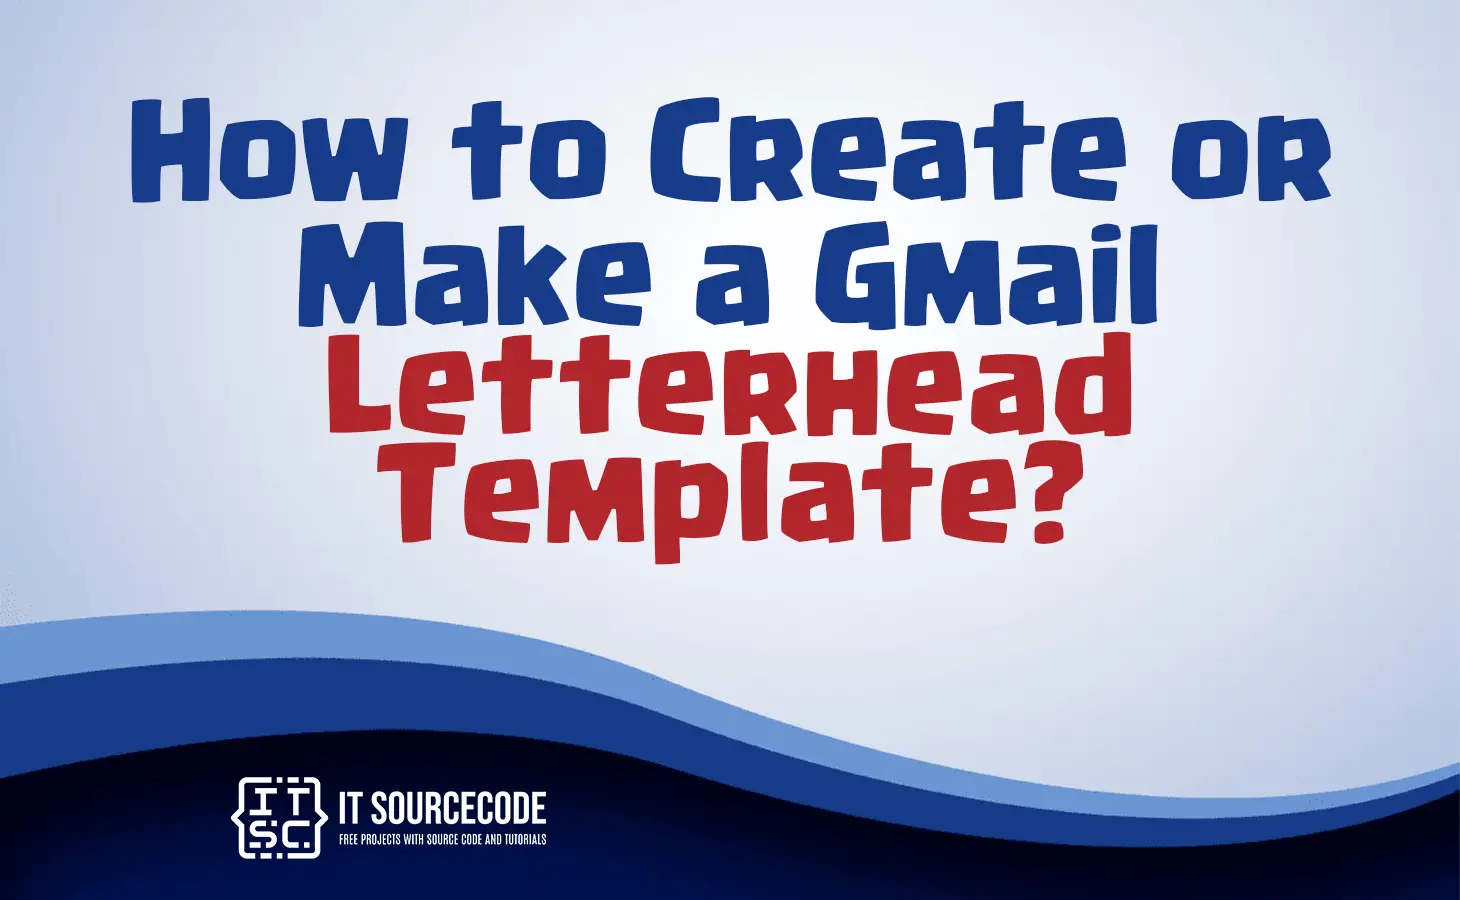 how to create a letterhead in gmail